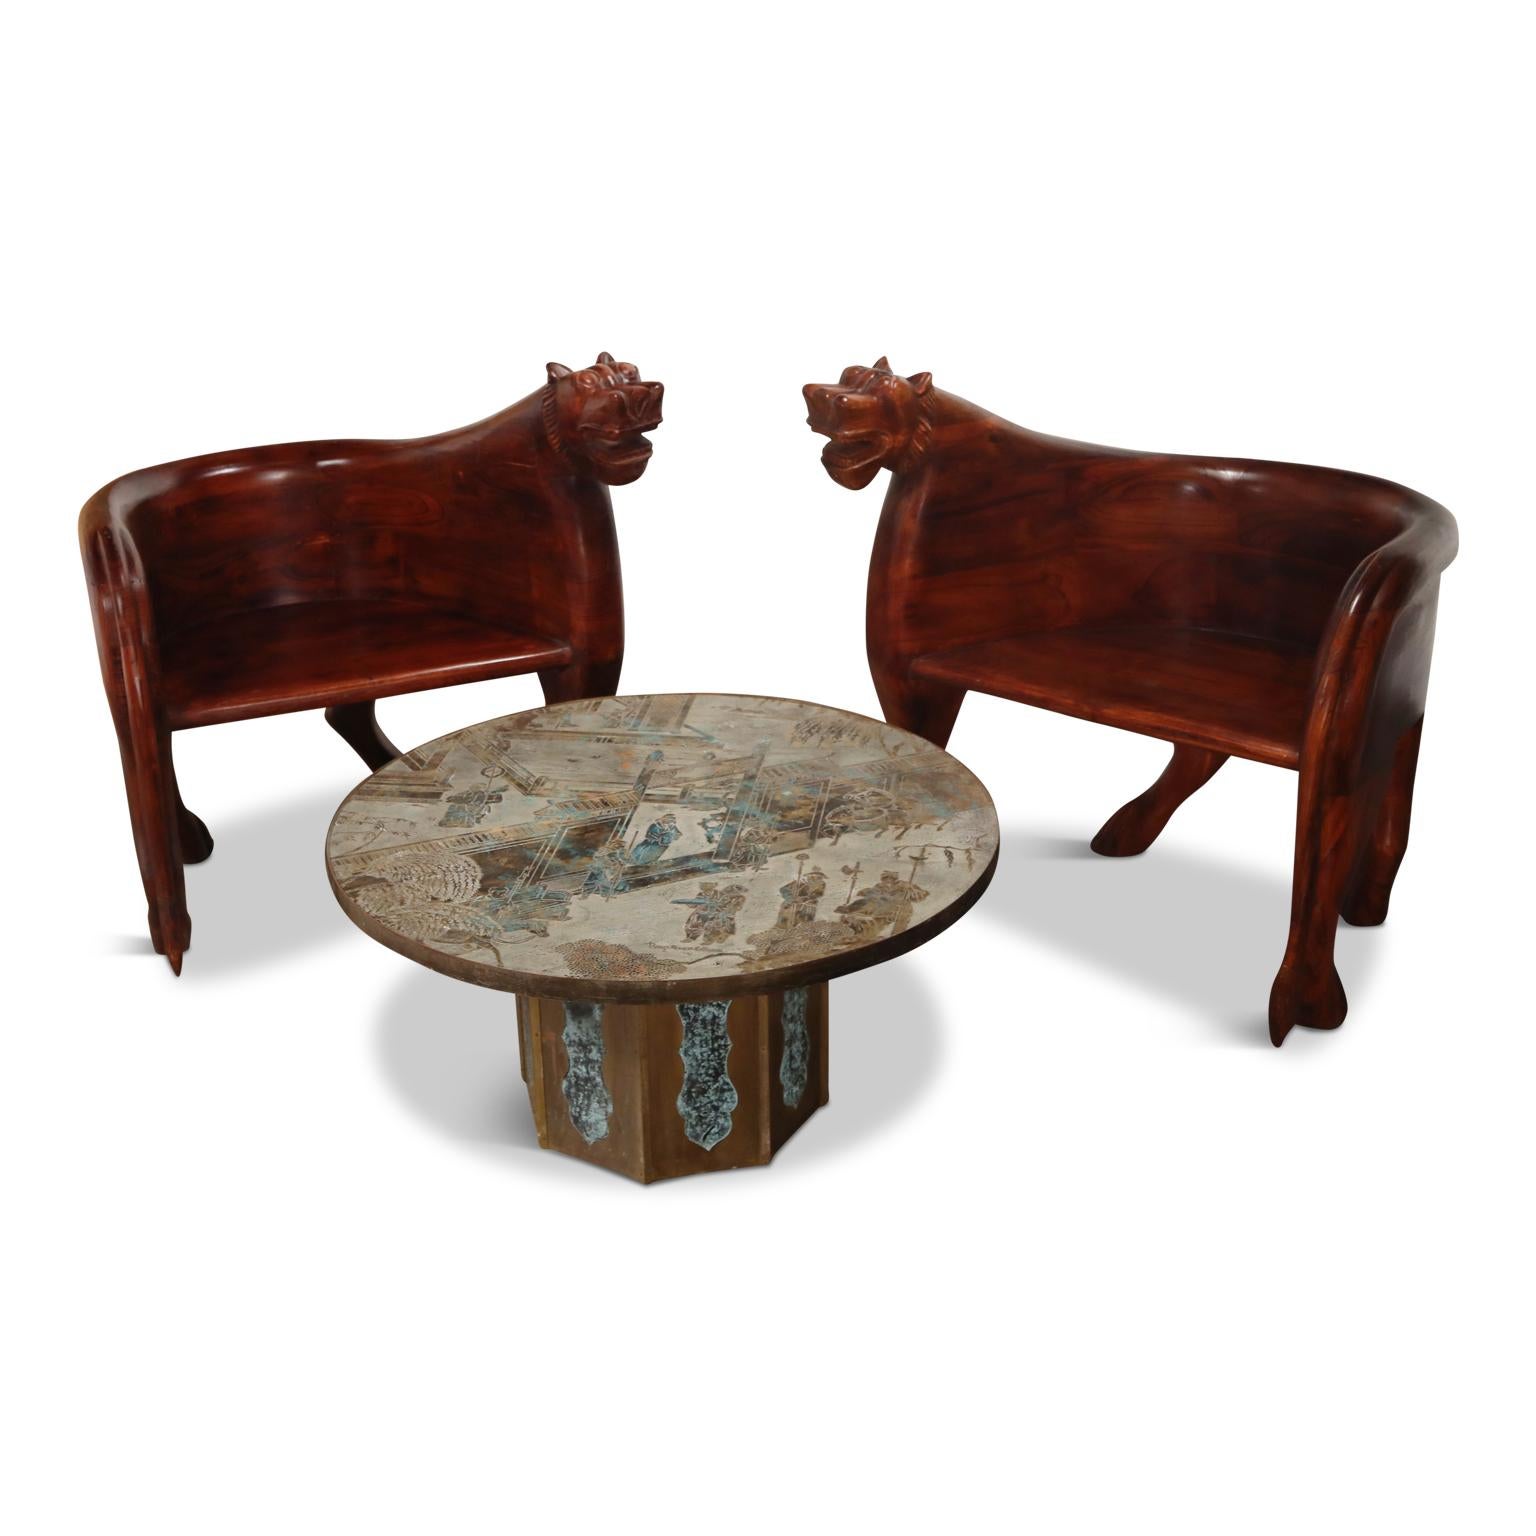 Organic Modern Pair of Figural Full Body Carved Teak Lioness Hunting Lodge Chairs